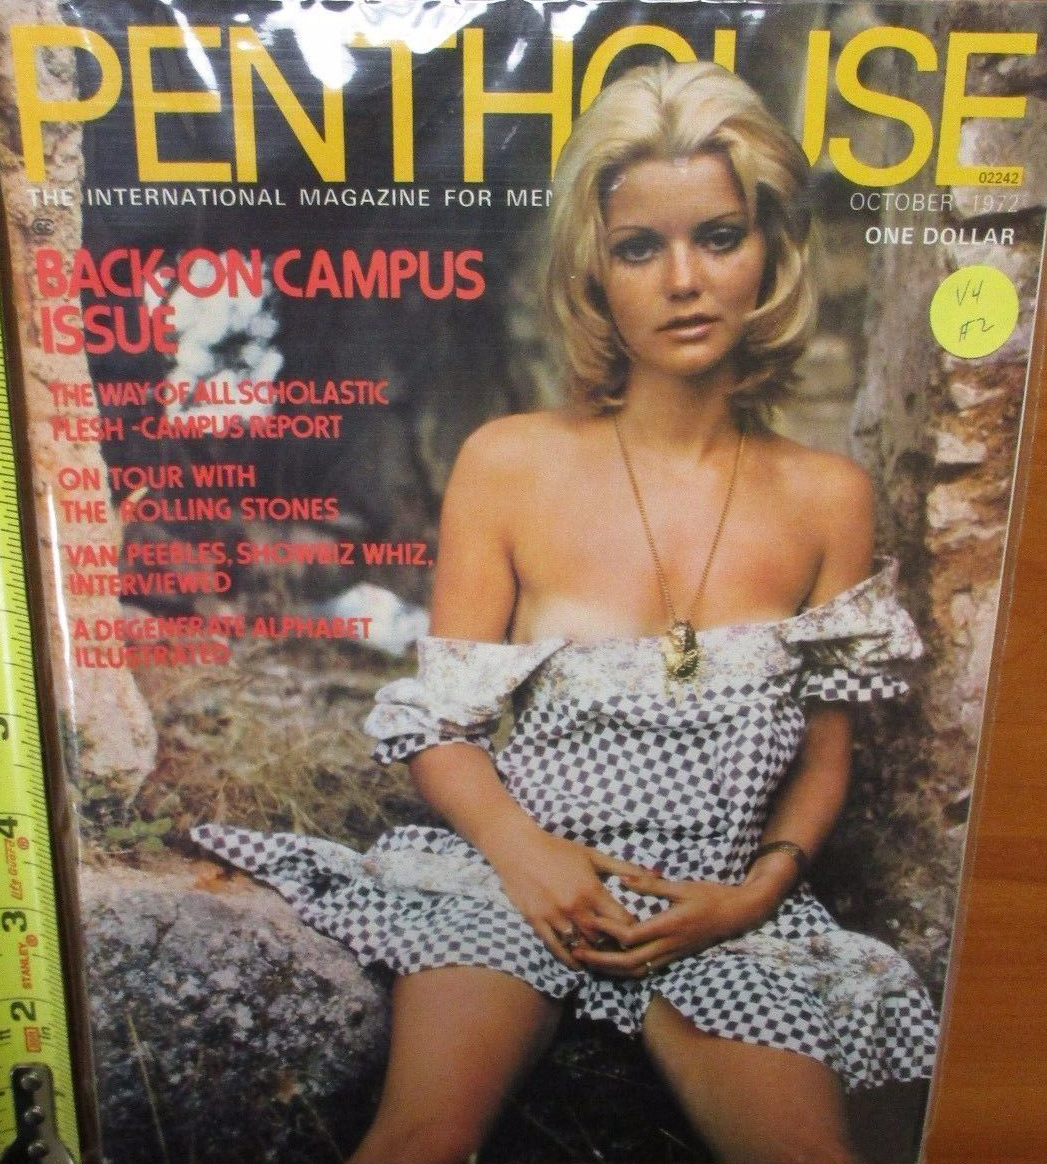 Penthouse UK Vol. 4 # 2 magazine back issue Penthouse UK magizine back copy Penthouse UK Vol. 4 # 2 Magazine Back Issue Published by Penthouse Publishing, Bob Guccione. The Way Of All Scholastic Flesh - Campus Report.